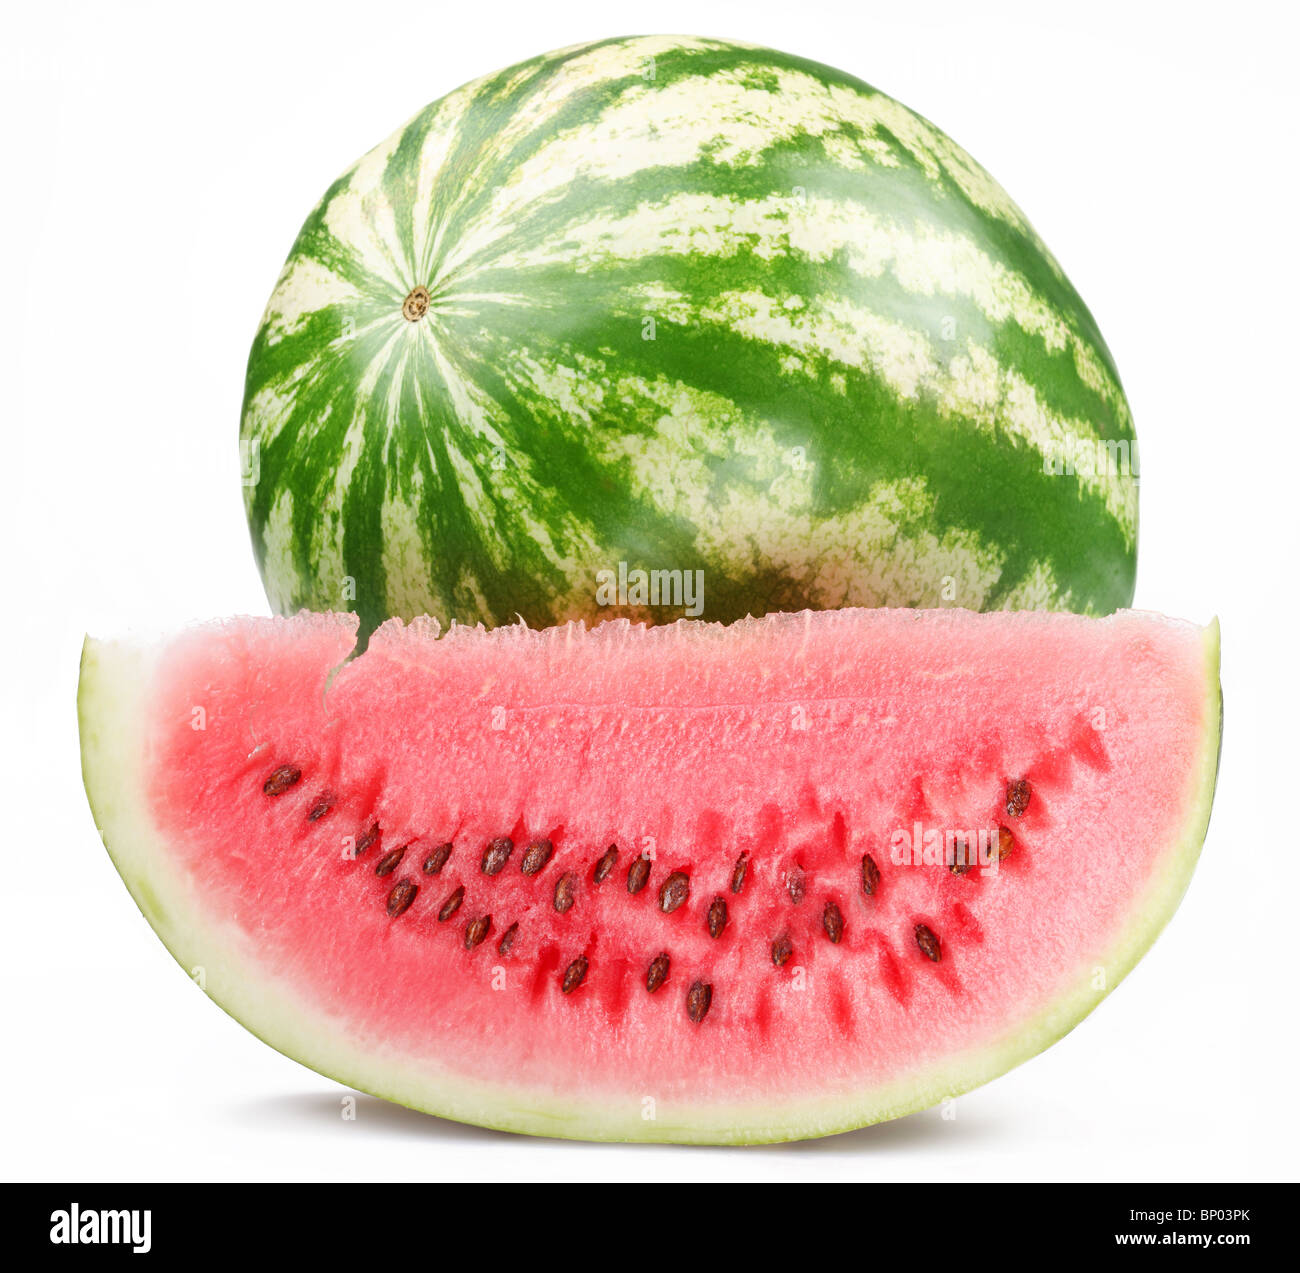 Ripe watermelon with a slice on a white background Stock Photo